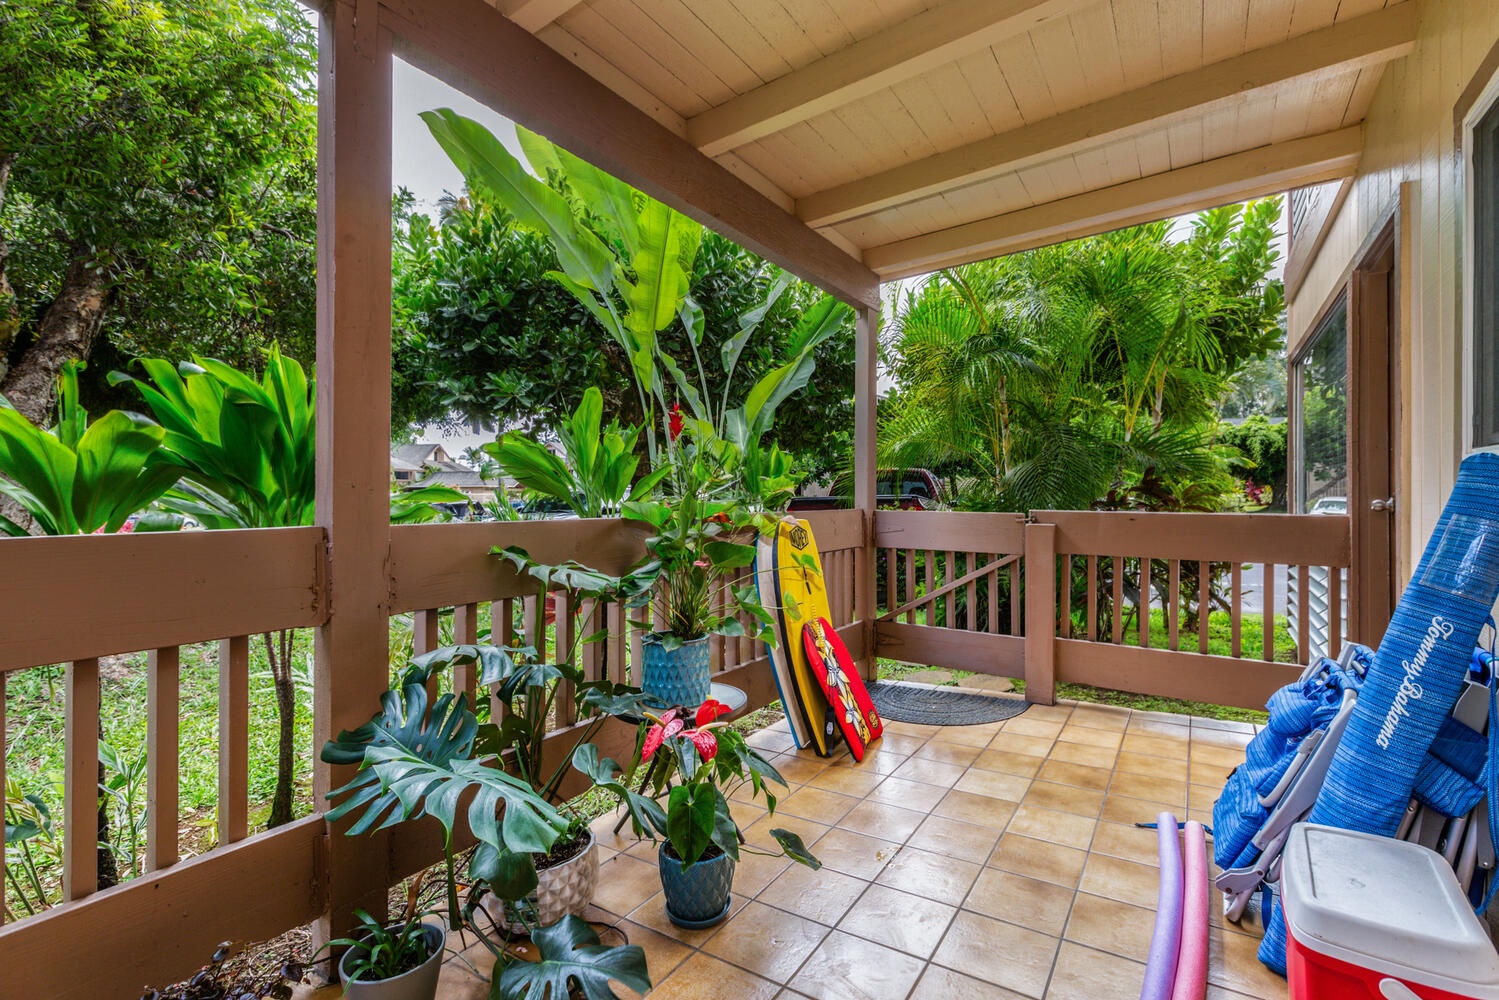 Princeville Vacation Rentals, Hideaway Haven - The lanai offers ultimate relaxation surrounded by lush array of tropical plants.